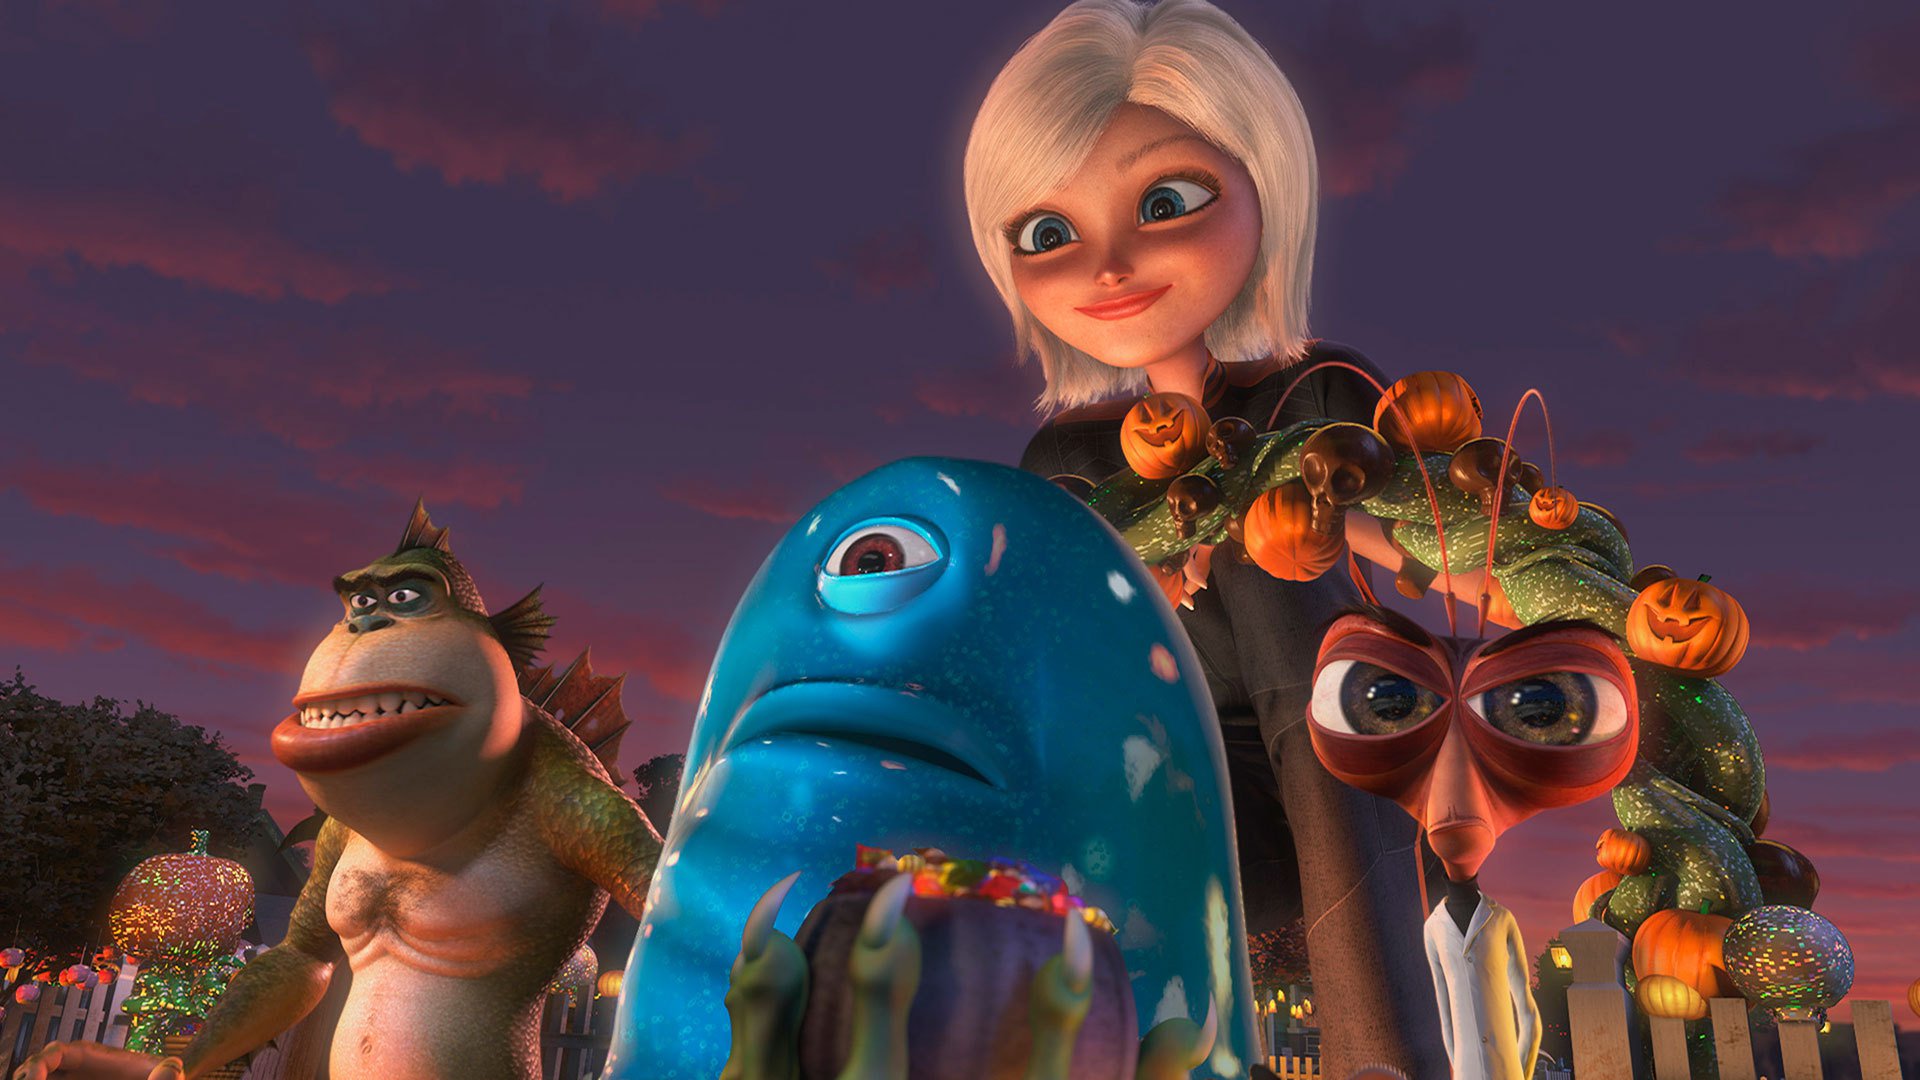 Monsters vs Aliens: Mutant Pumpkins from Outer Space